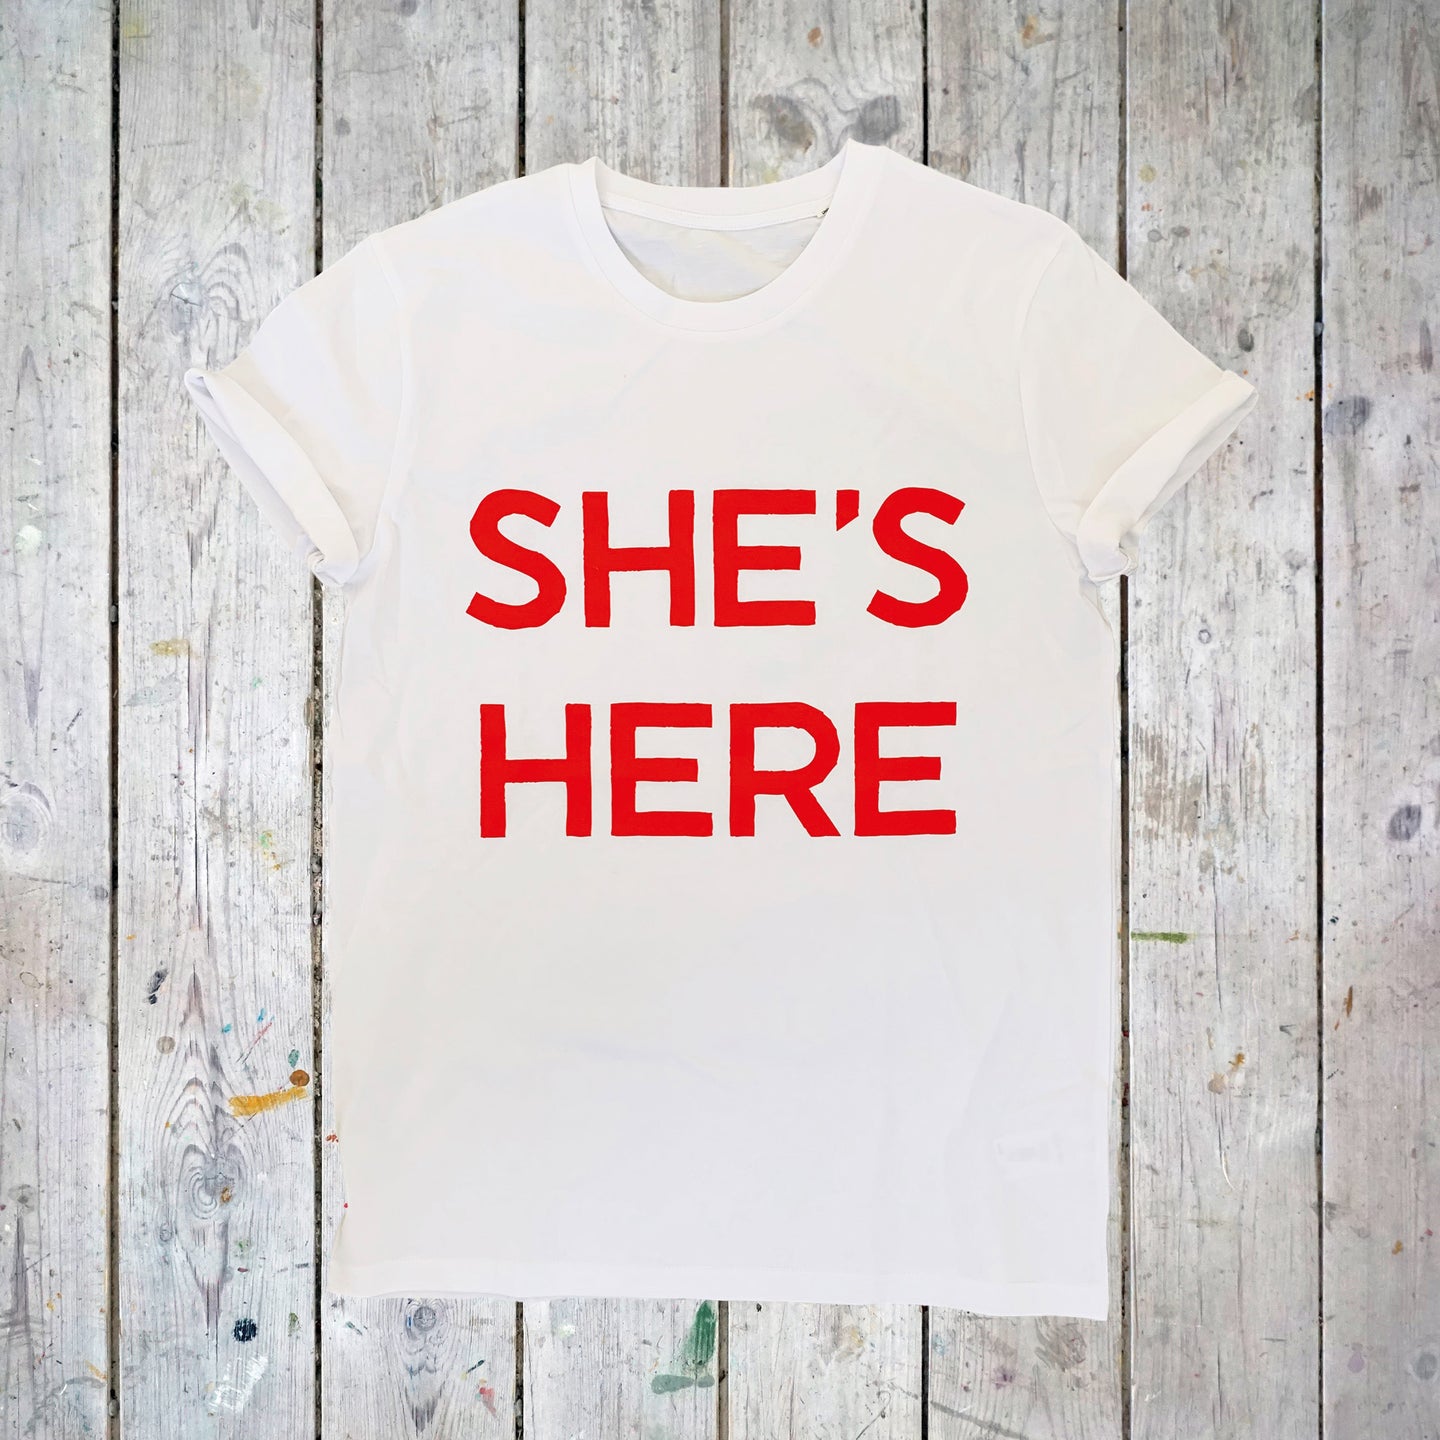 SHE'S HERE, T-SHIRT